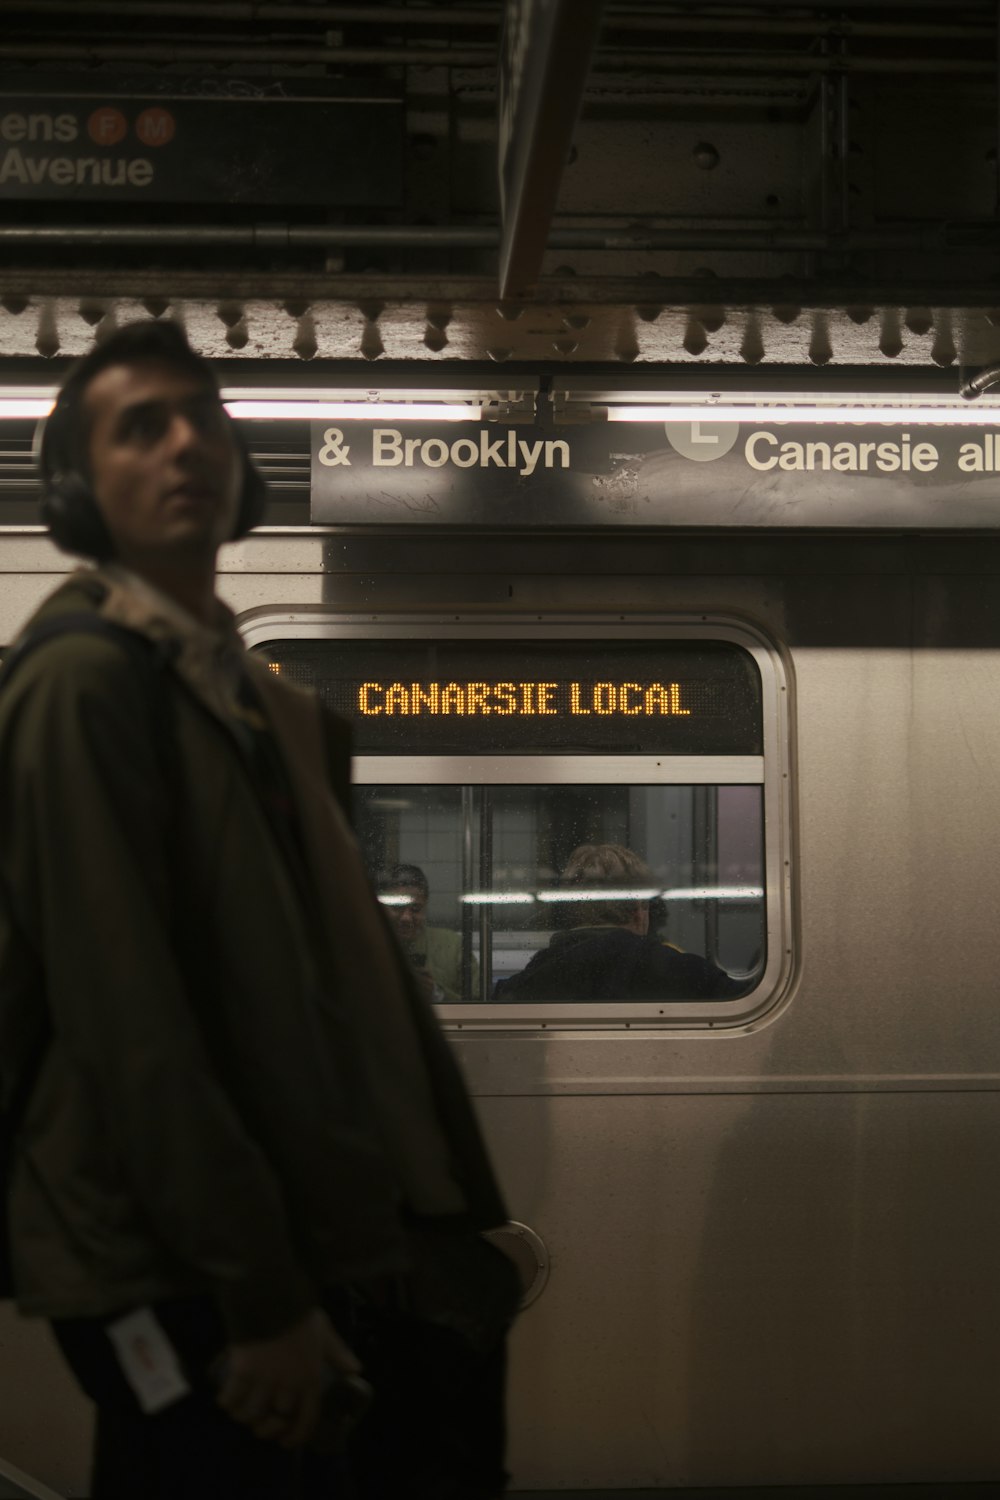 a man standing in front of a subway car